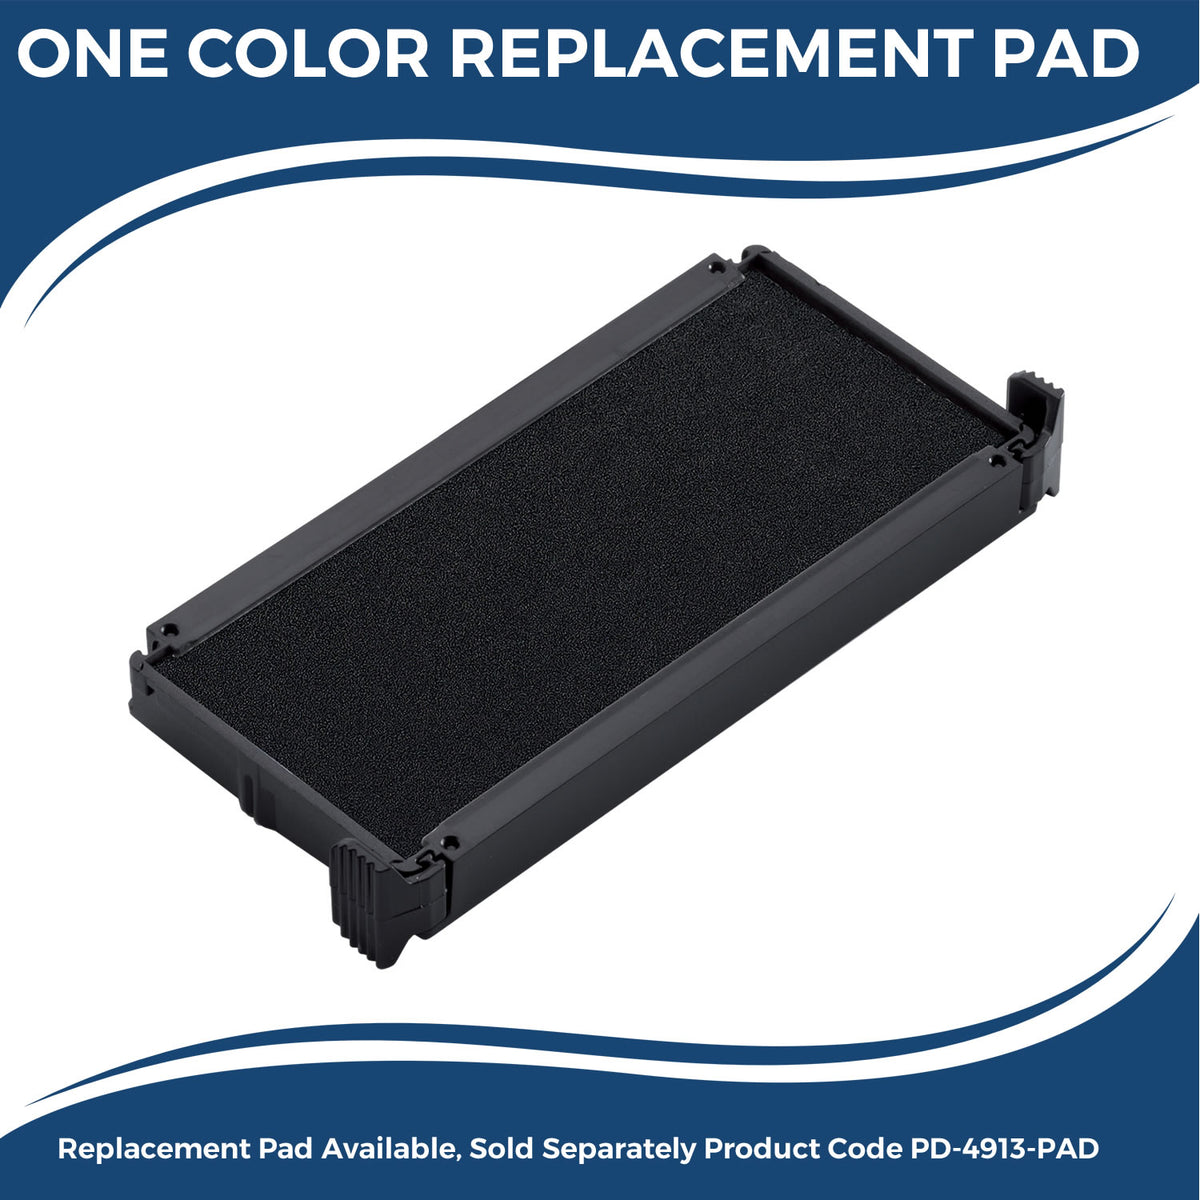 Large Self-Inking Urgente Stamp 5559S Large Replacment Pad